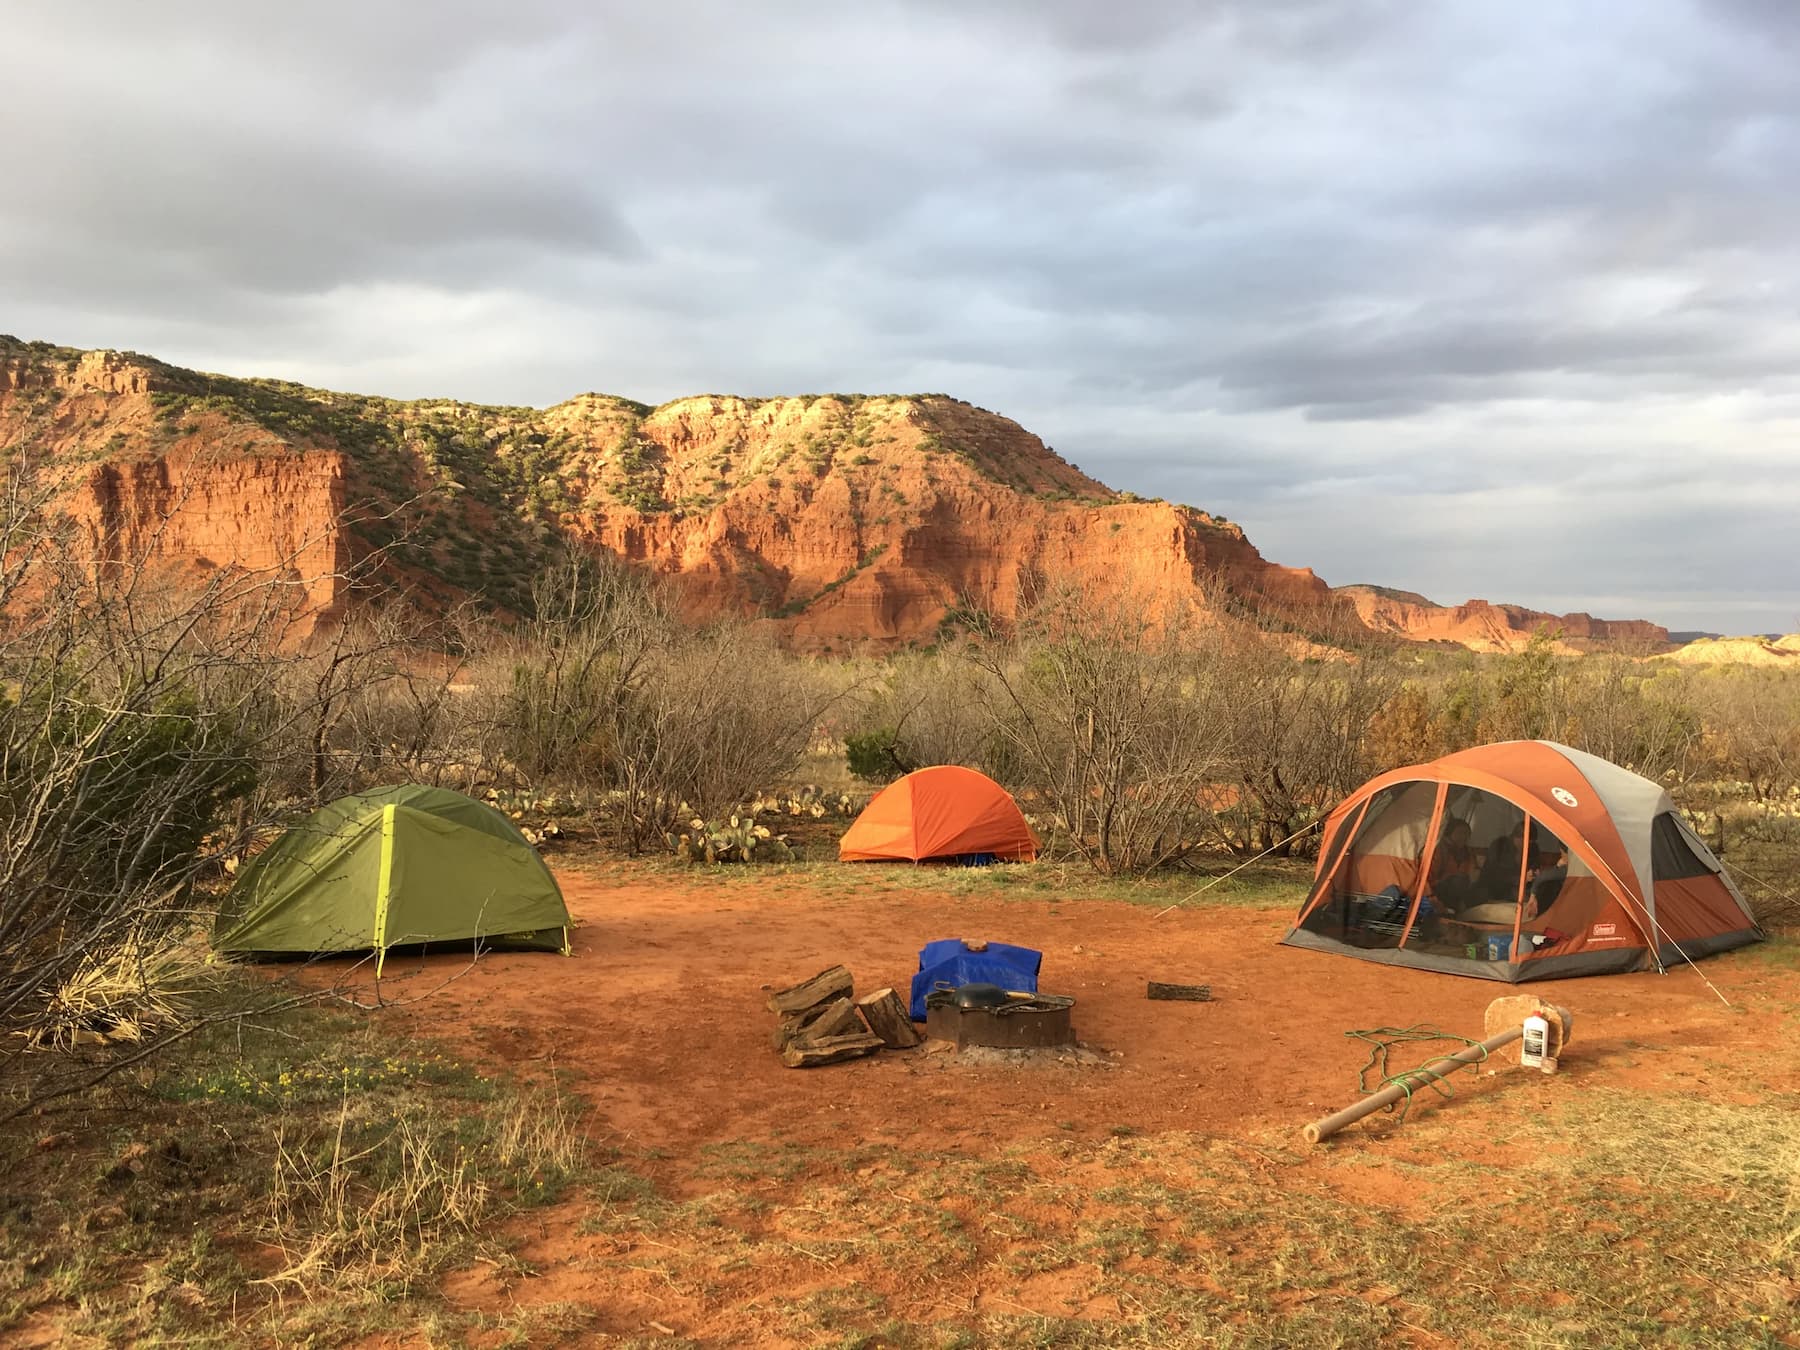 Three tents pitched at a desert campsite surrounded by red rock walls covered in sage brush.